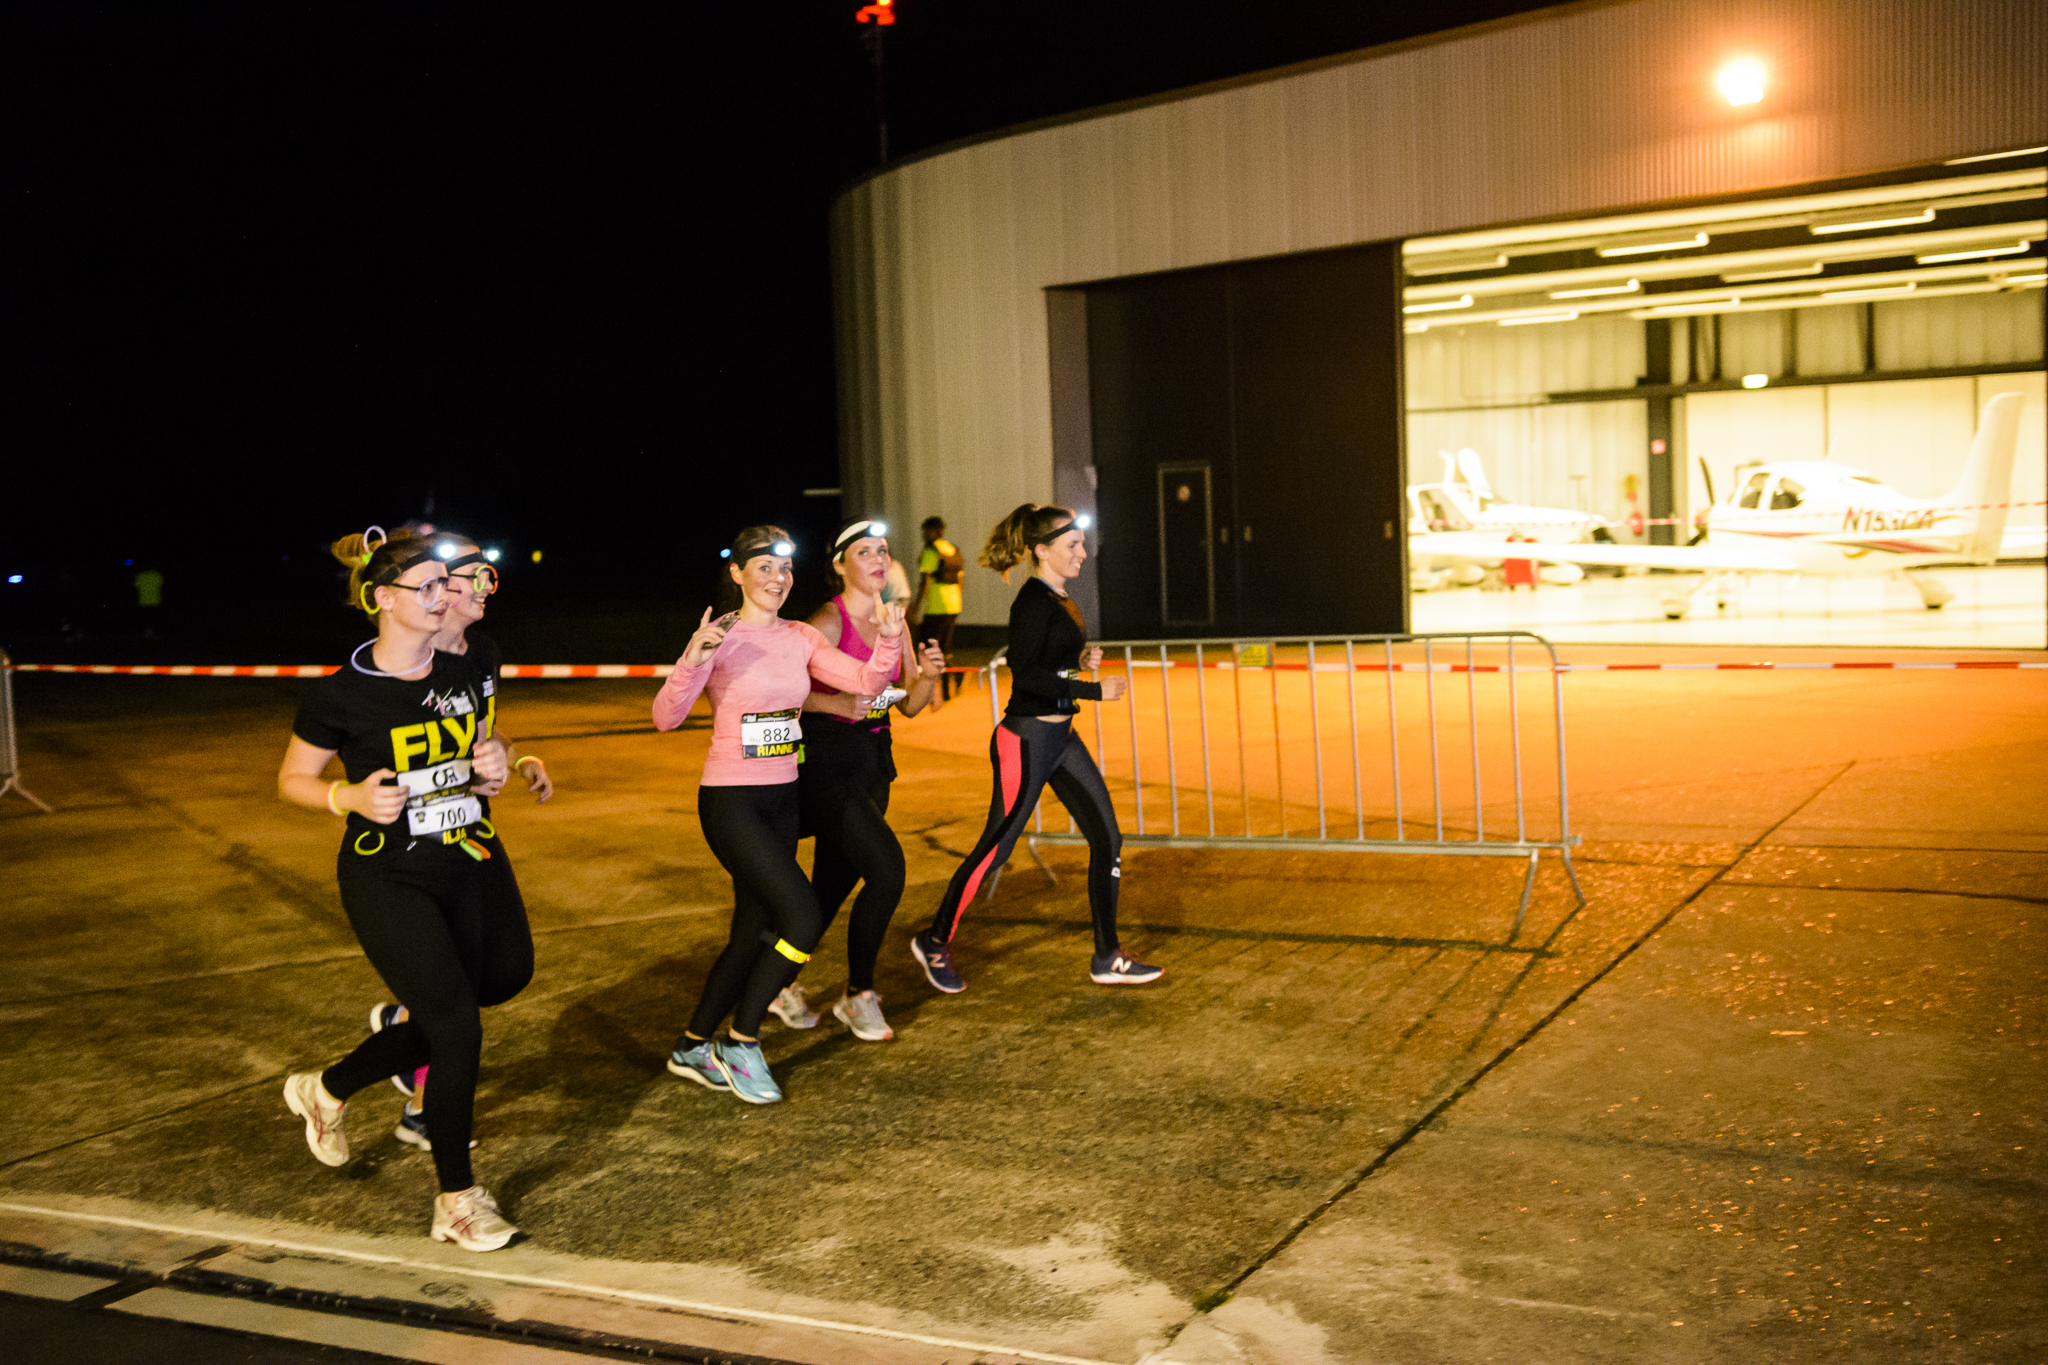 Inschrijving derde editie Mobility Service Airport Night Run geopend